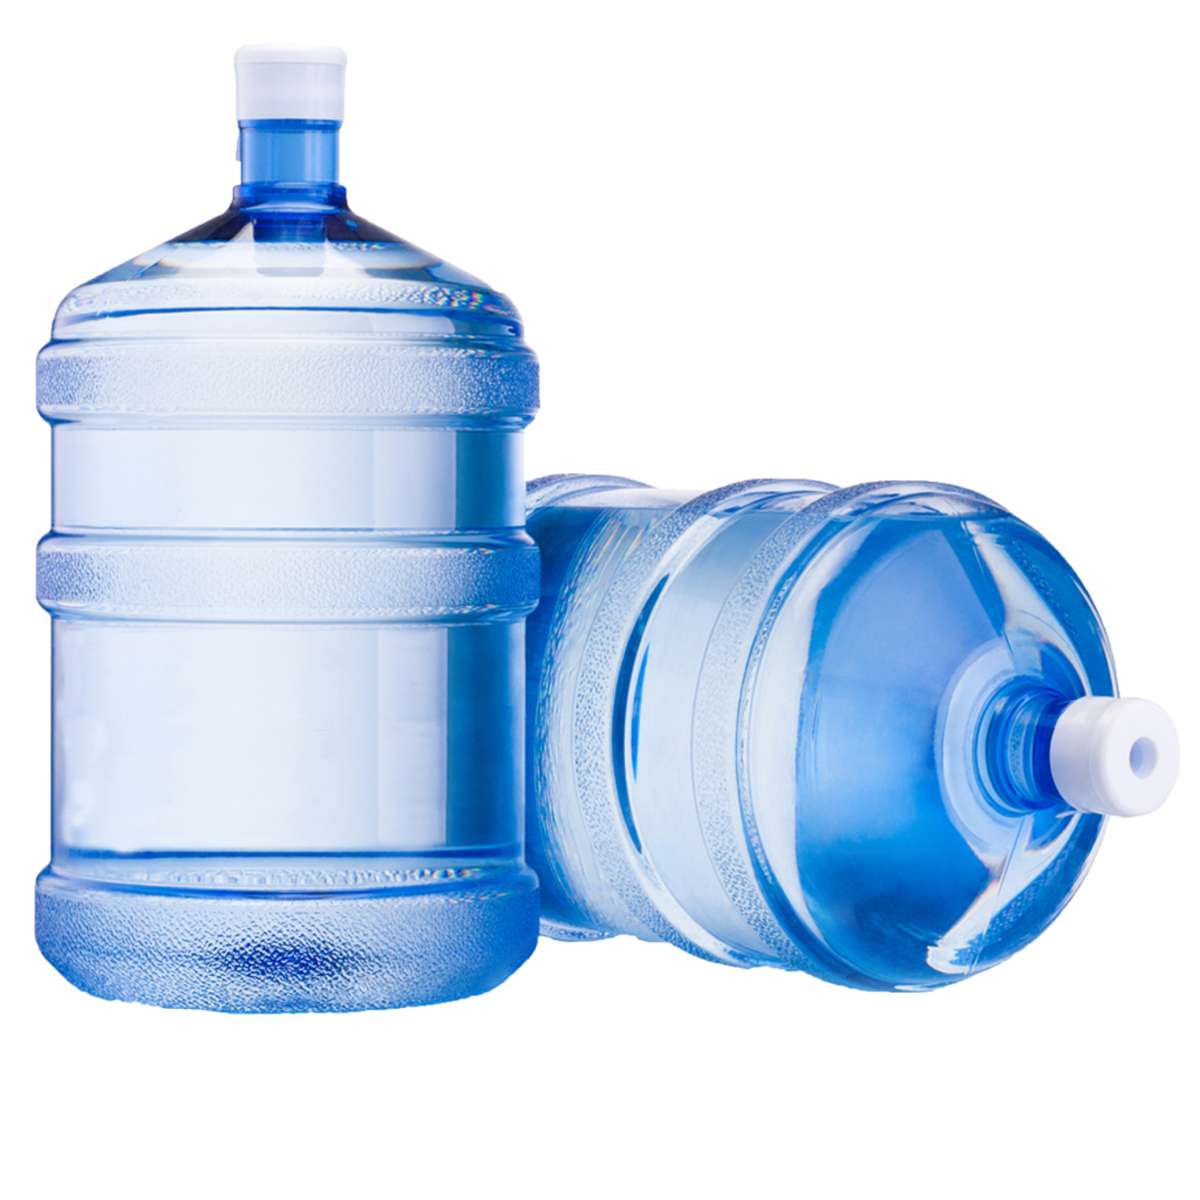 Gallon of Water puzzle online from photo